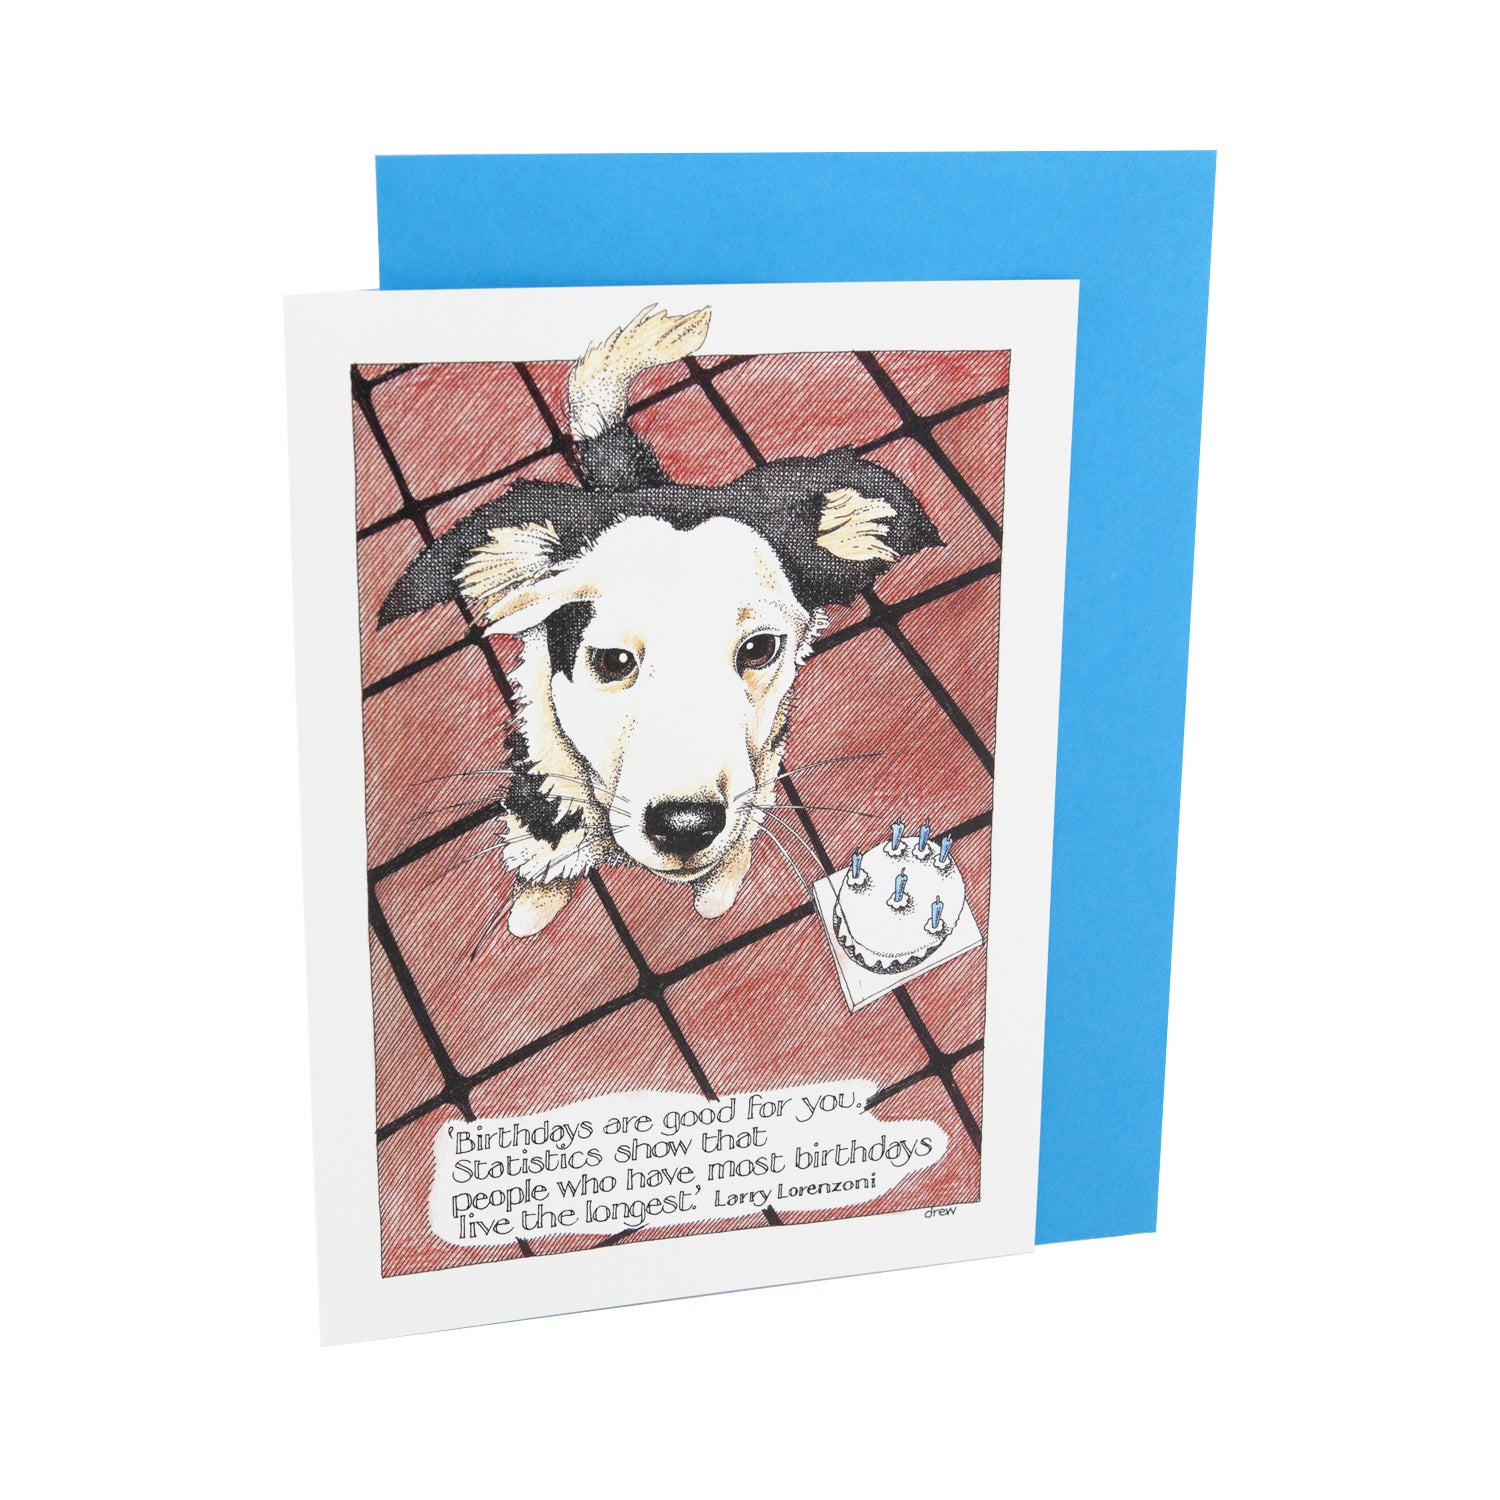 DogKrazy.Gifts – Simon Drew Birthdays Are Good, Humorous card featuring a Collie Dog. Part of the Simon Drew Dog Collection available from Dog Krazy Gifts